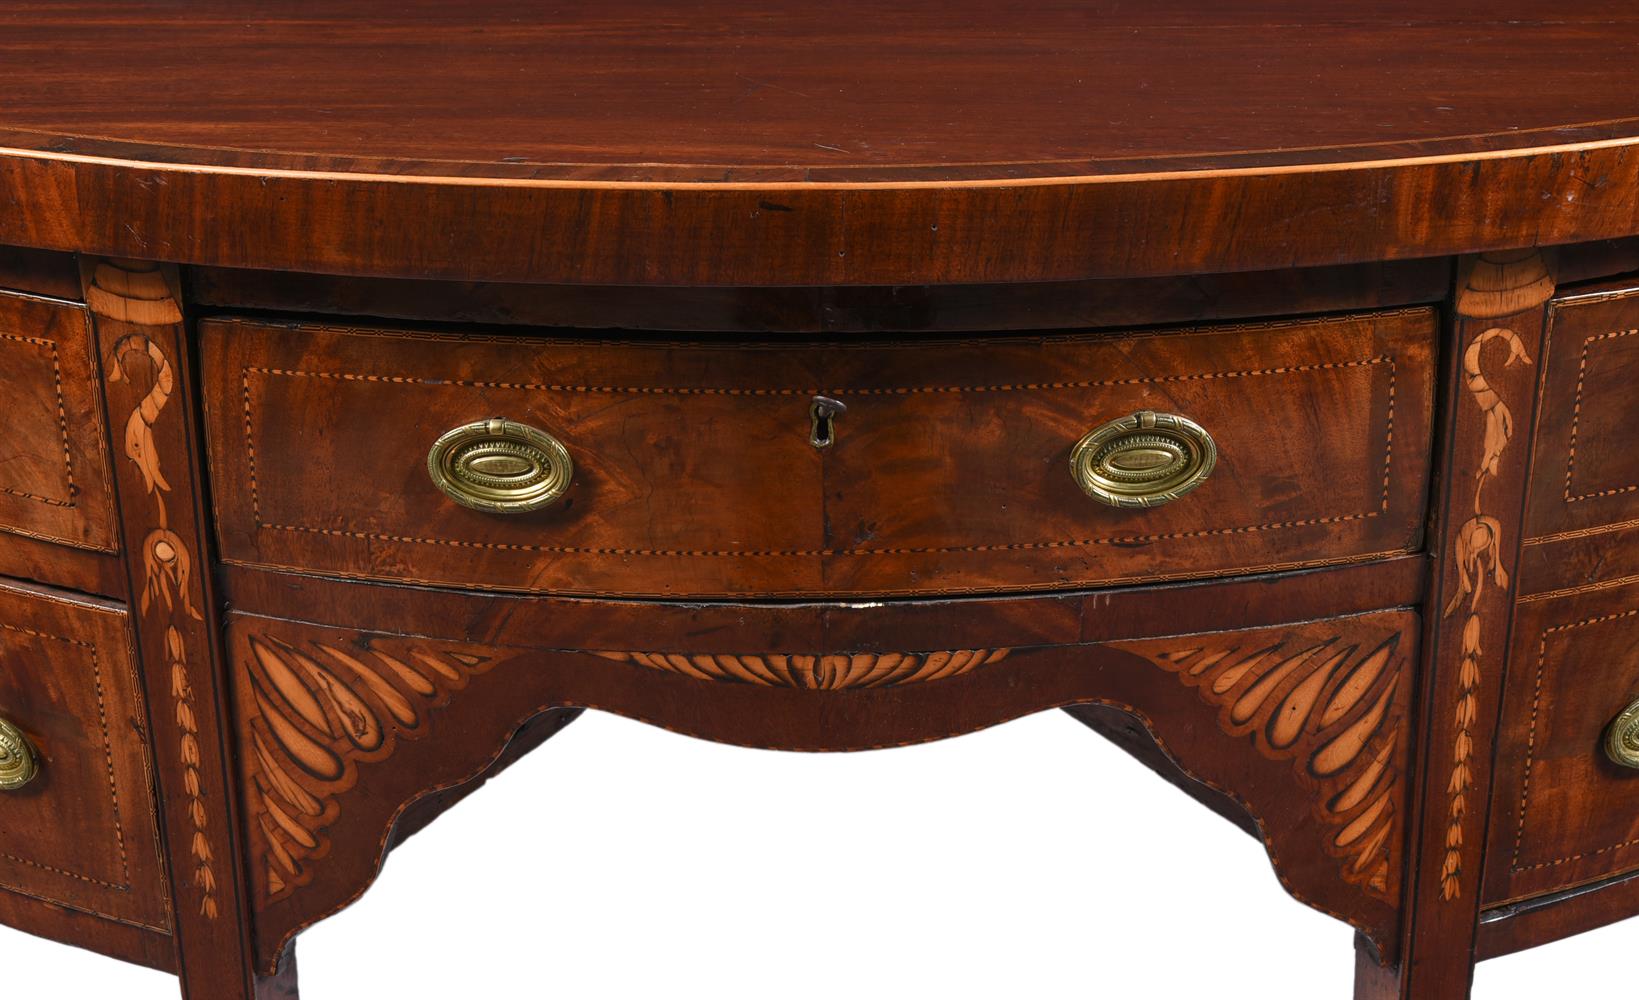 A GEORGE III MAHOGANY AND MARQUETRY INLAID SIDEBOARD - Image 2 of 2